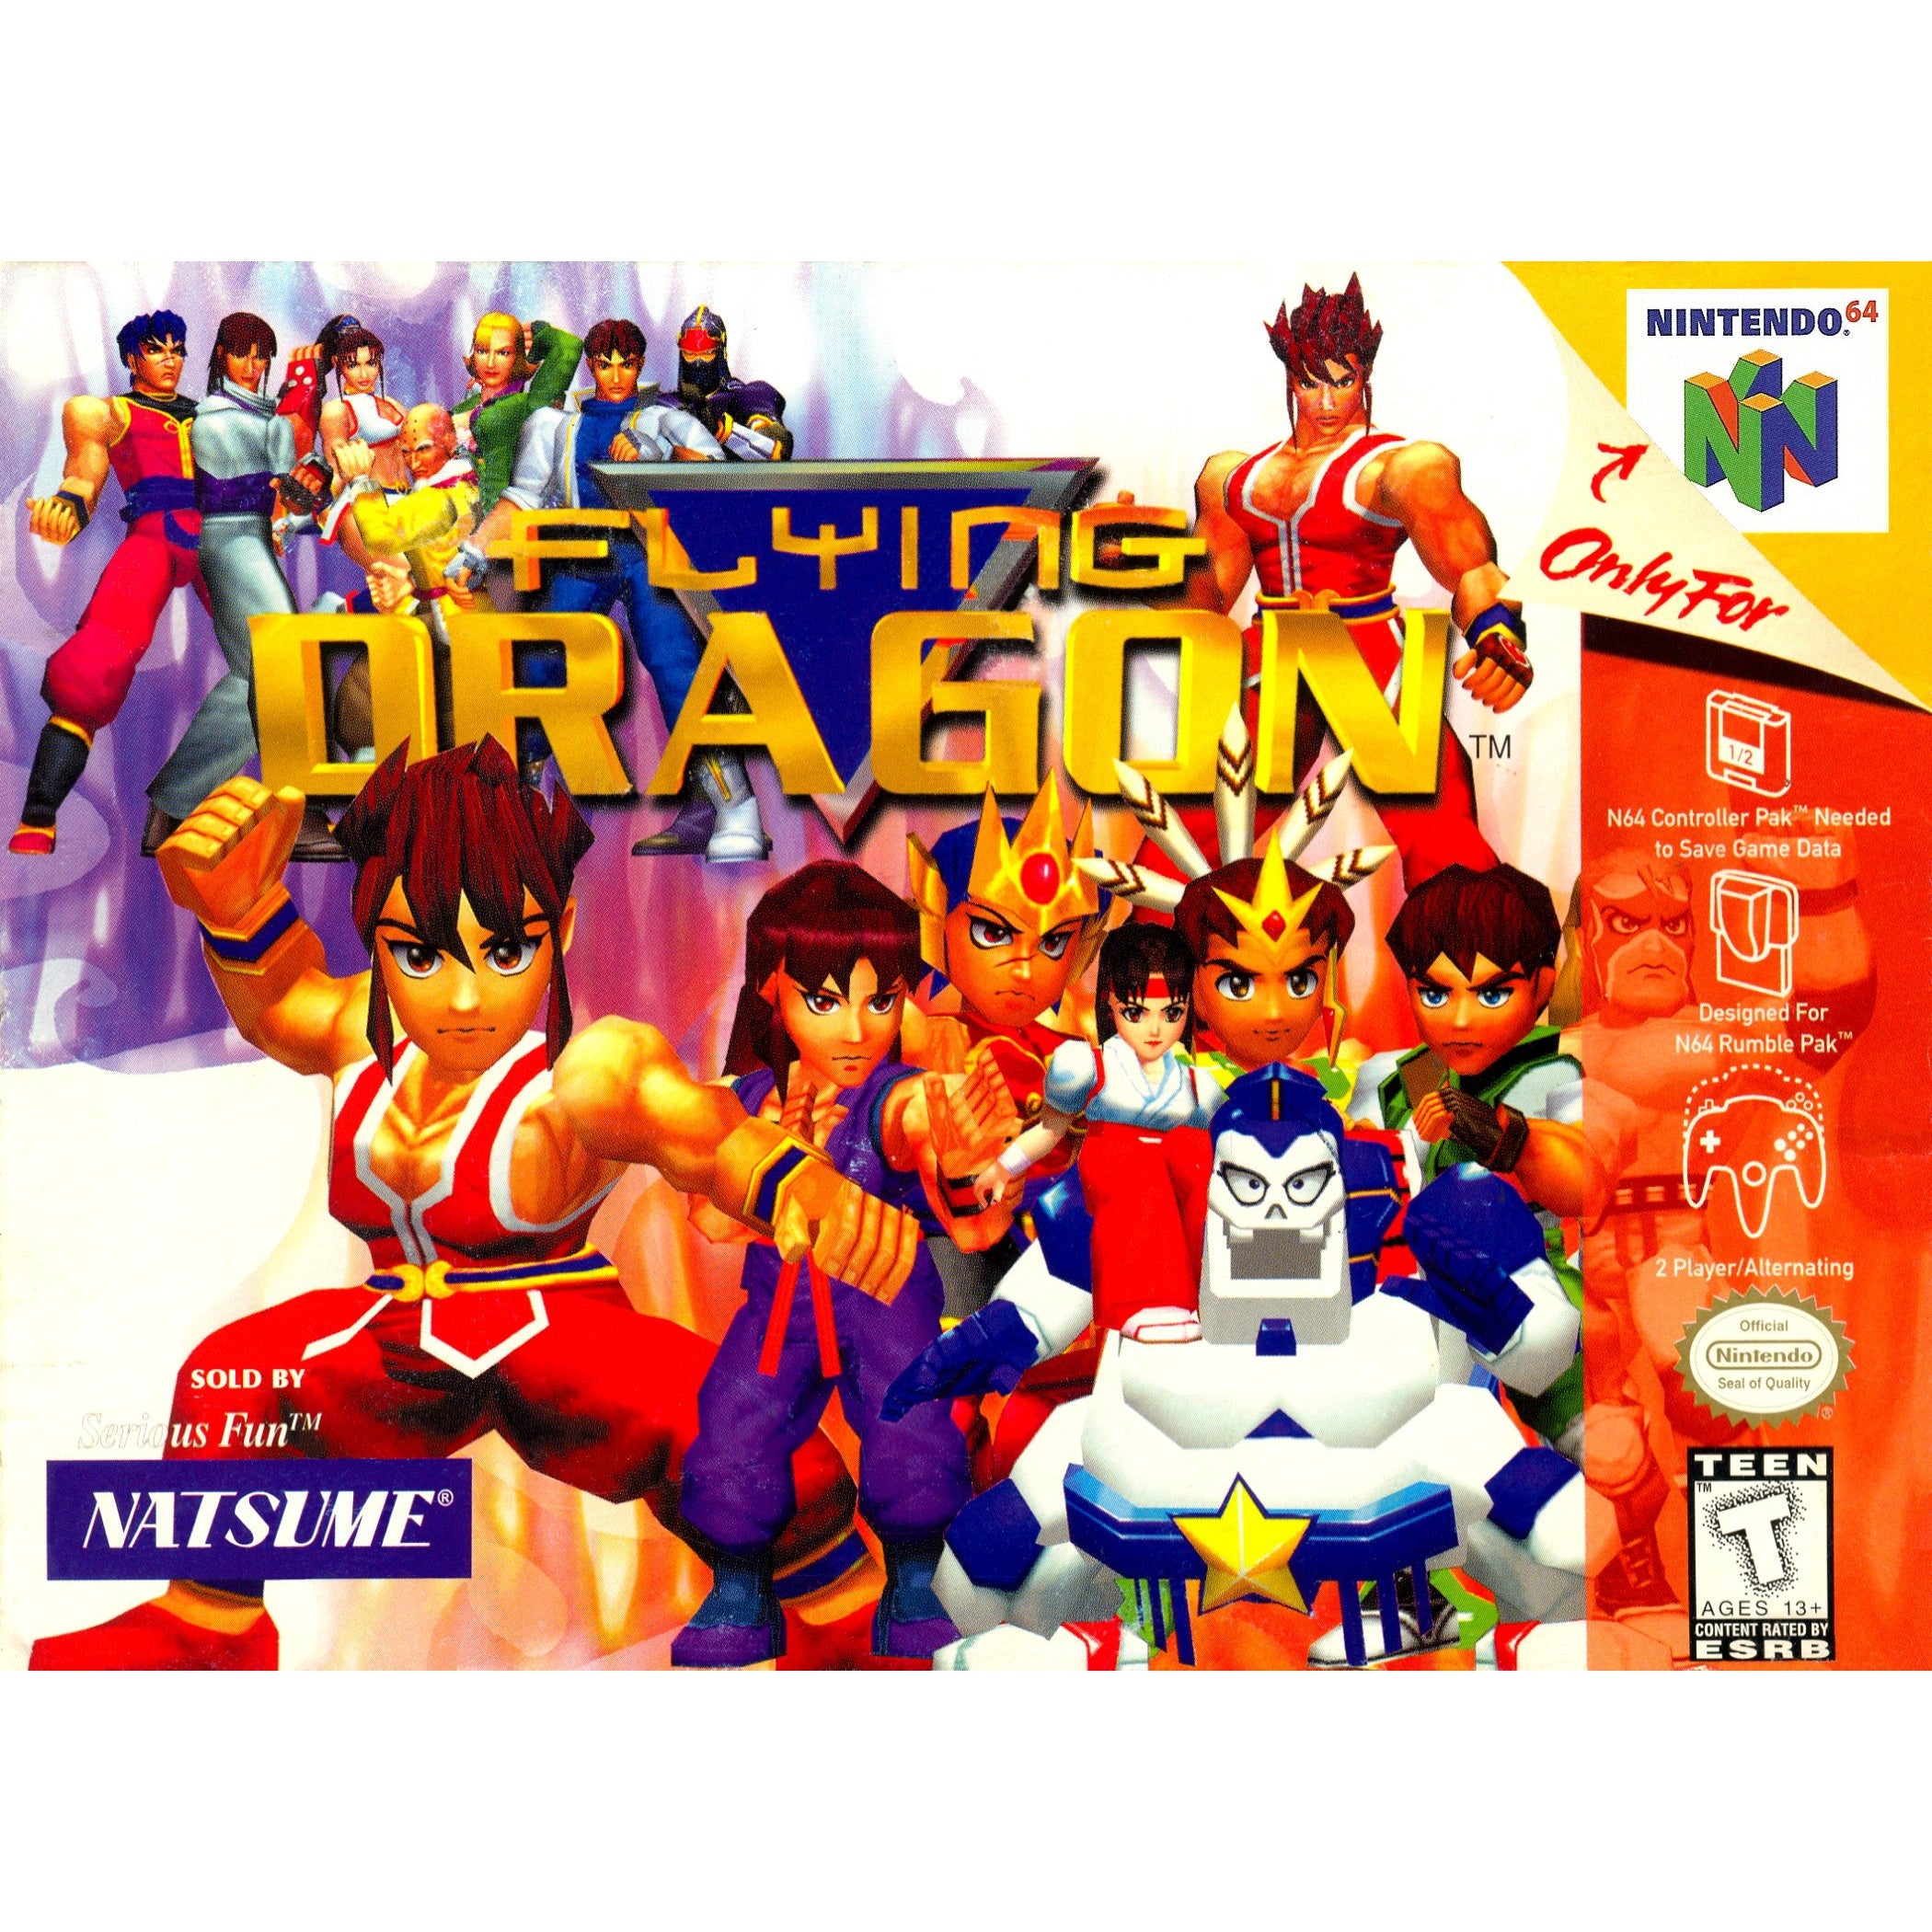 Flying Dragon - Authentic Nintendo 64 (N64) Game Cartridge - YourGamingShop.com - Buy, Sell, Trade Video Games Online. 120 Day Warranty. Satisfaction Guaranteed.